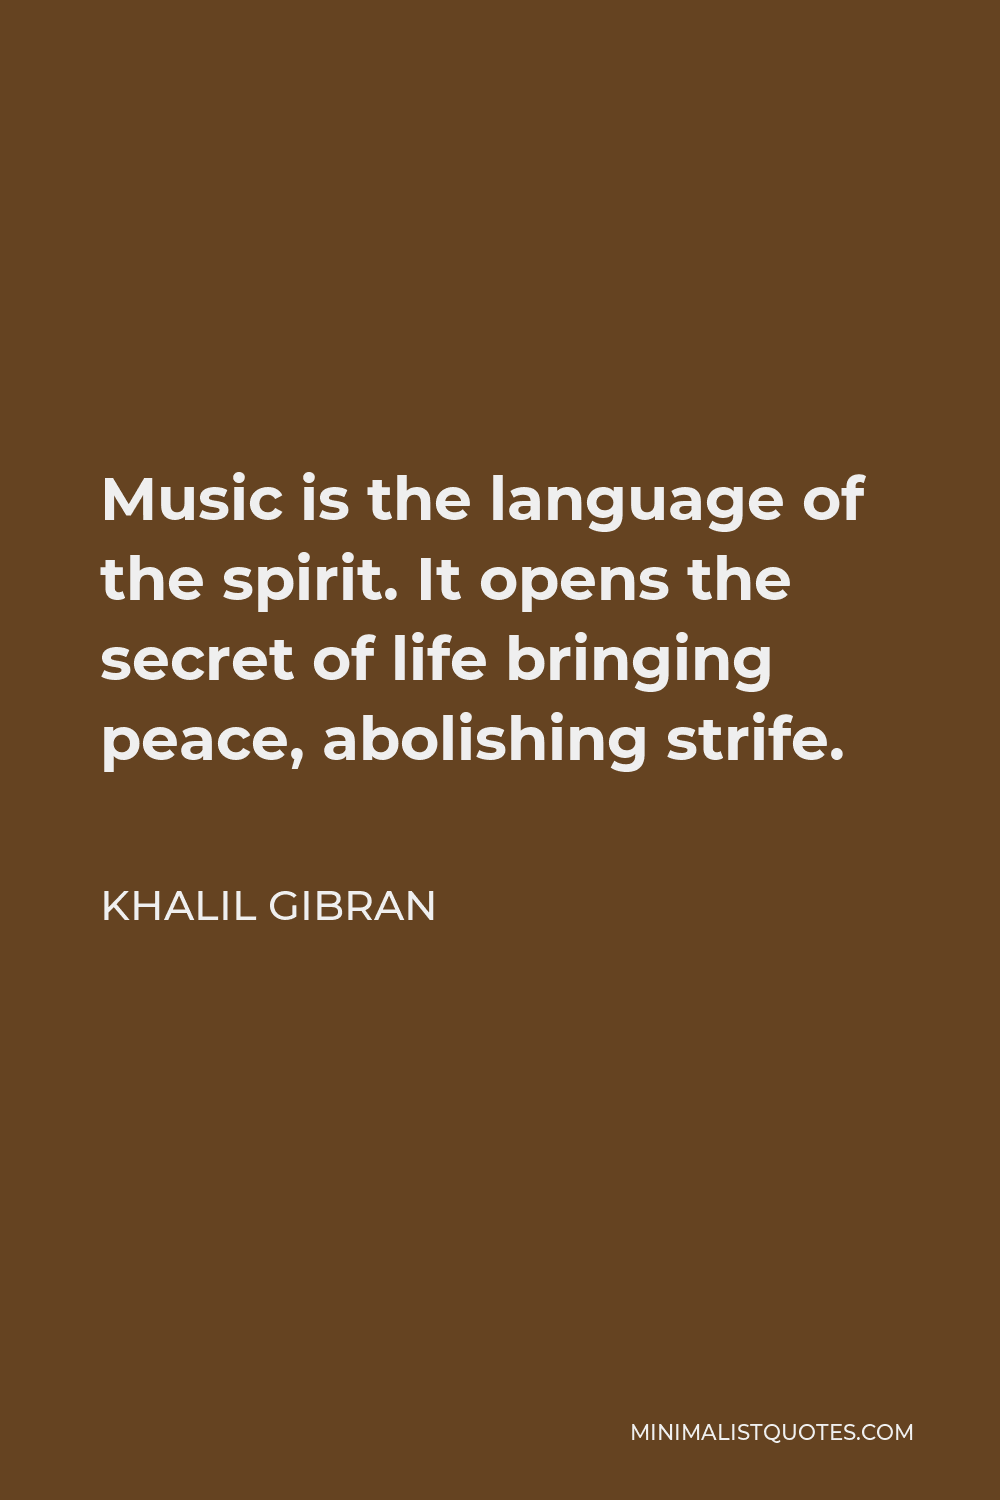 Khalil Gibran Quote - Music is the language of the spirit. It opens the secret of life bringing peace, abolishing strife.